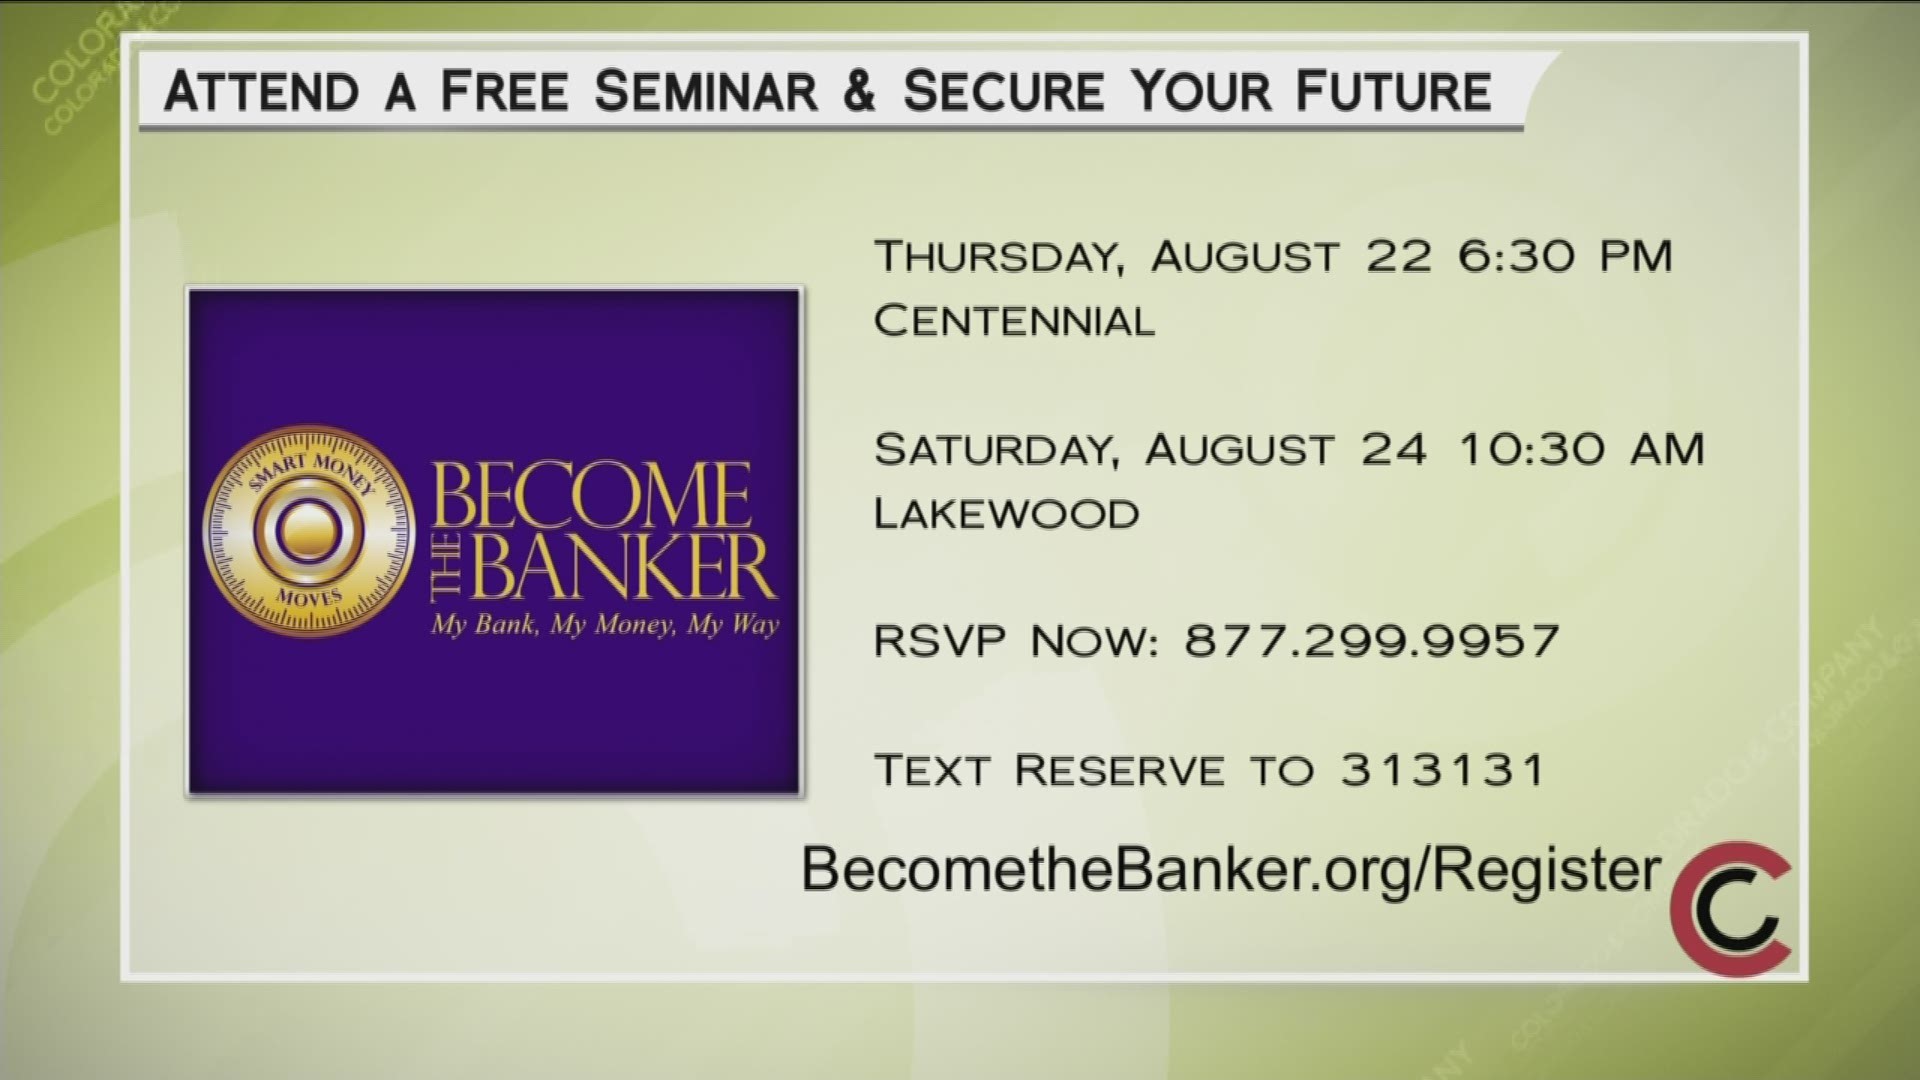 Secure your financial future by attending a free Become the Banker seminar. There are two dates to choose from—August 22nd in Centennial at 6:30PM, and August 24th in Lakewood at 10:30AM. Register today by calling 877.299.9957, or you can text RESERVE to 313131. Learn more about the Become the Banker strategy at www.BecomeTheBanker.org. 
THIS INTERVIEW HAS COMMERCIAL CONTENT. PRODUCTS AND SERVICES FEATURED APPEAR AS PAID ADVERTISING.